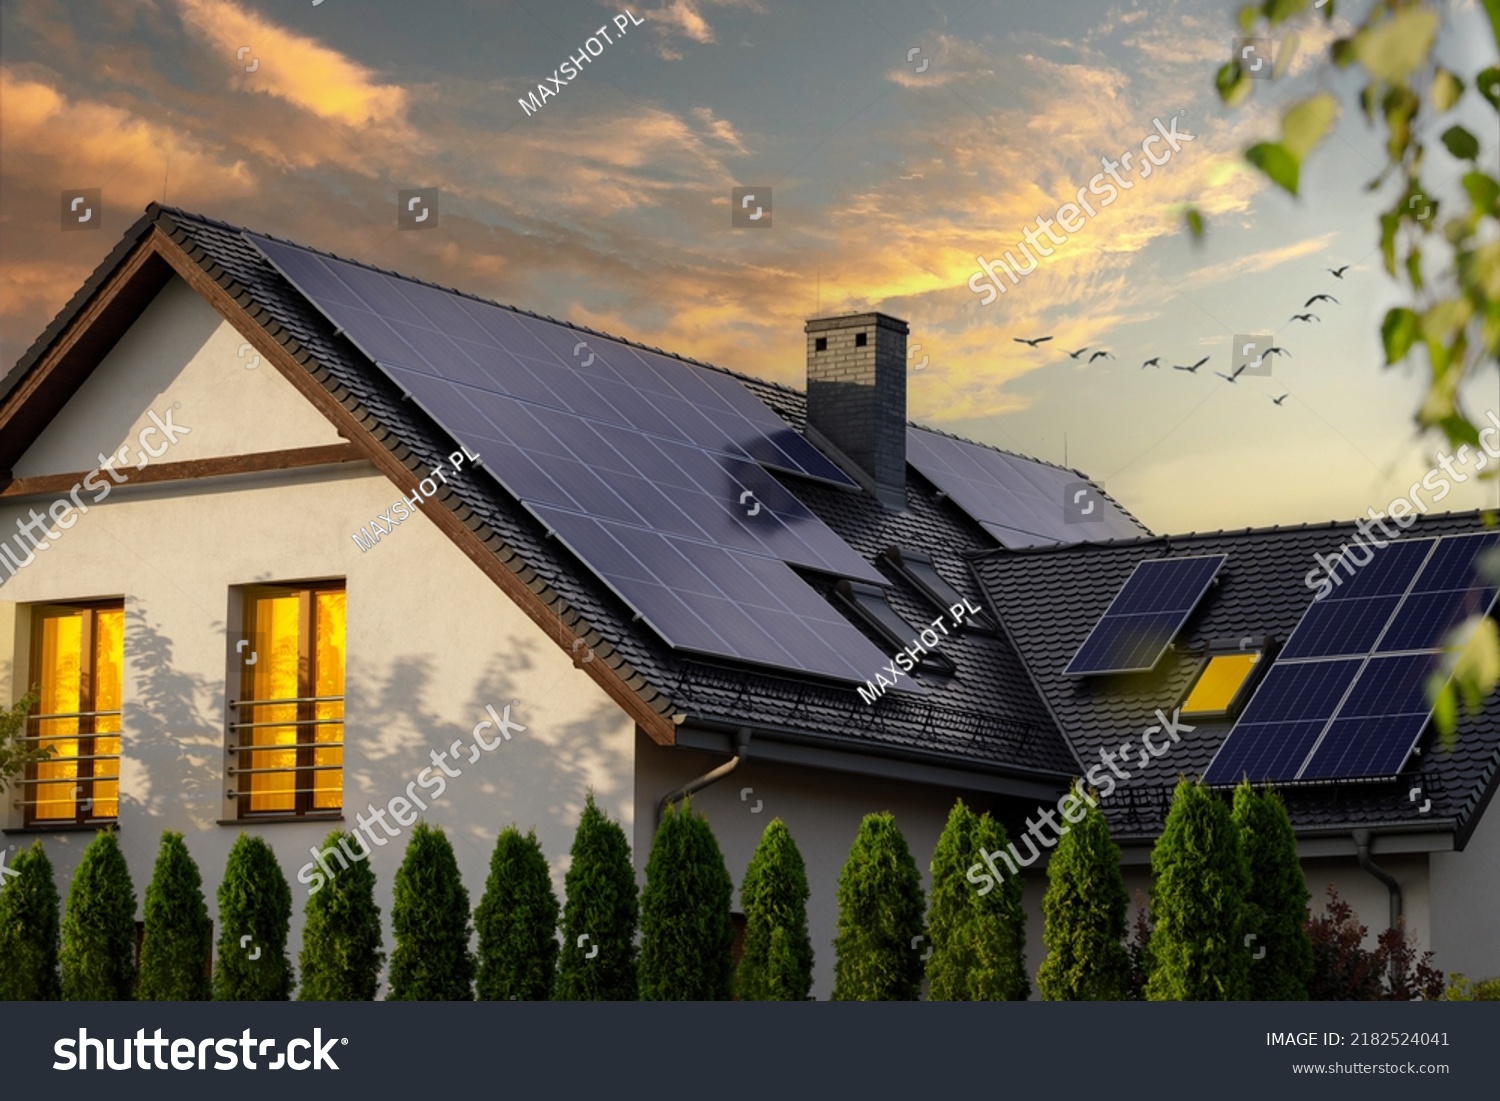 Modern house with solar panels. Night view of a beautiful white house with solar panels. #2182524041